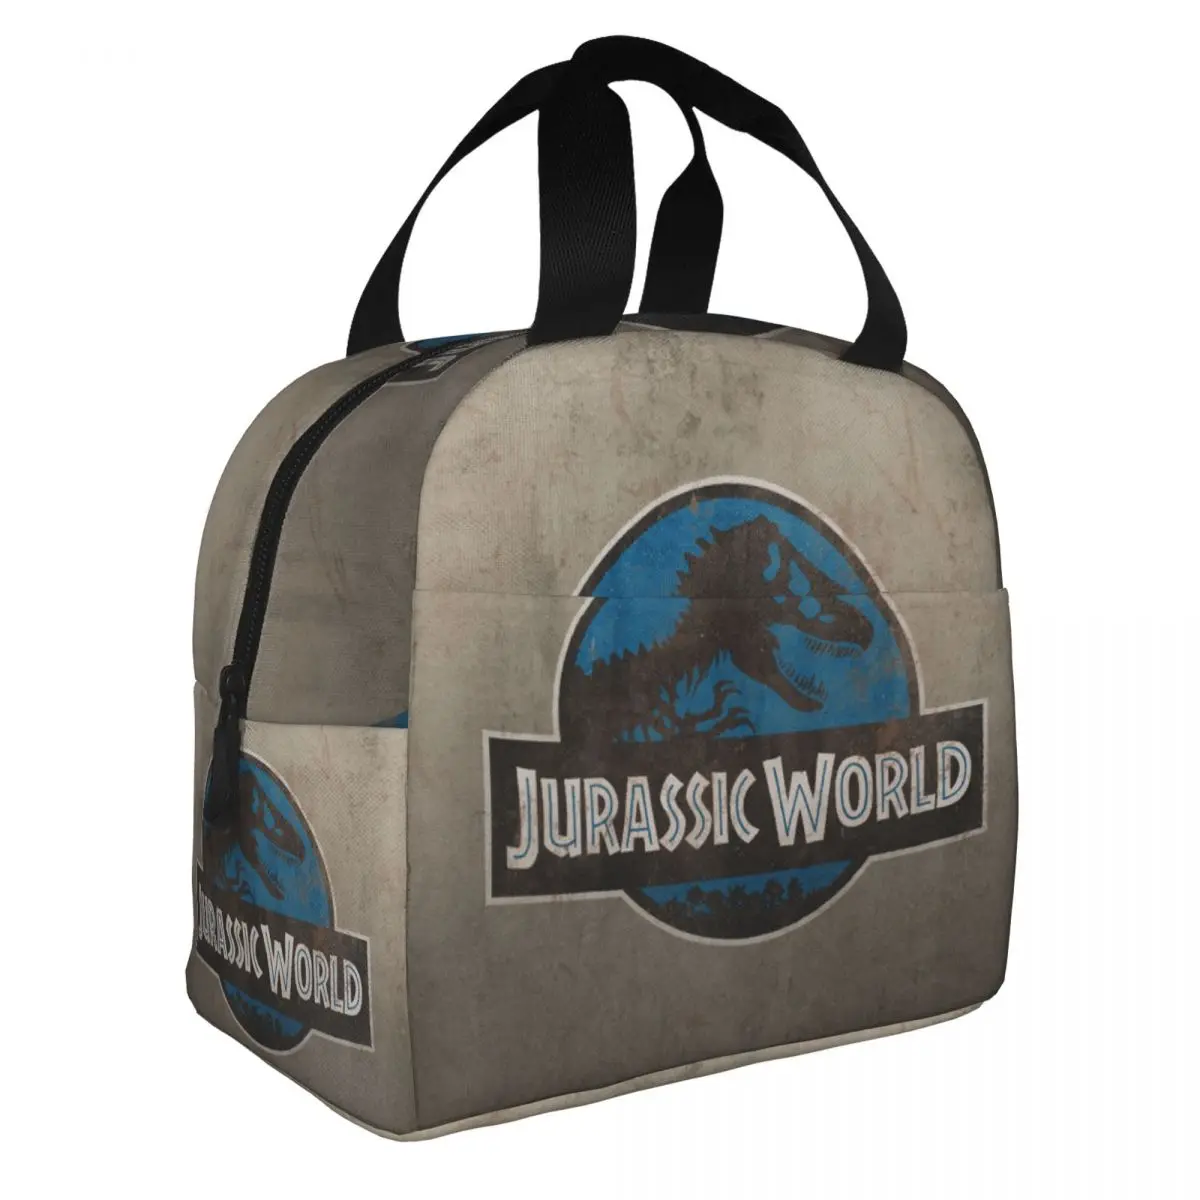 Jurassic World Lunch Bento Bags Portable Aluminum Foil thickened Thermal Cloth Lunch Bag for Women Men Boy